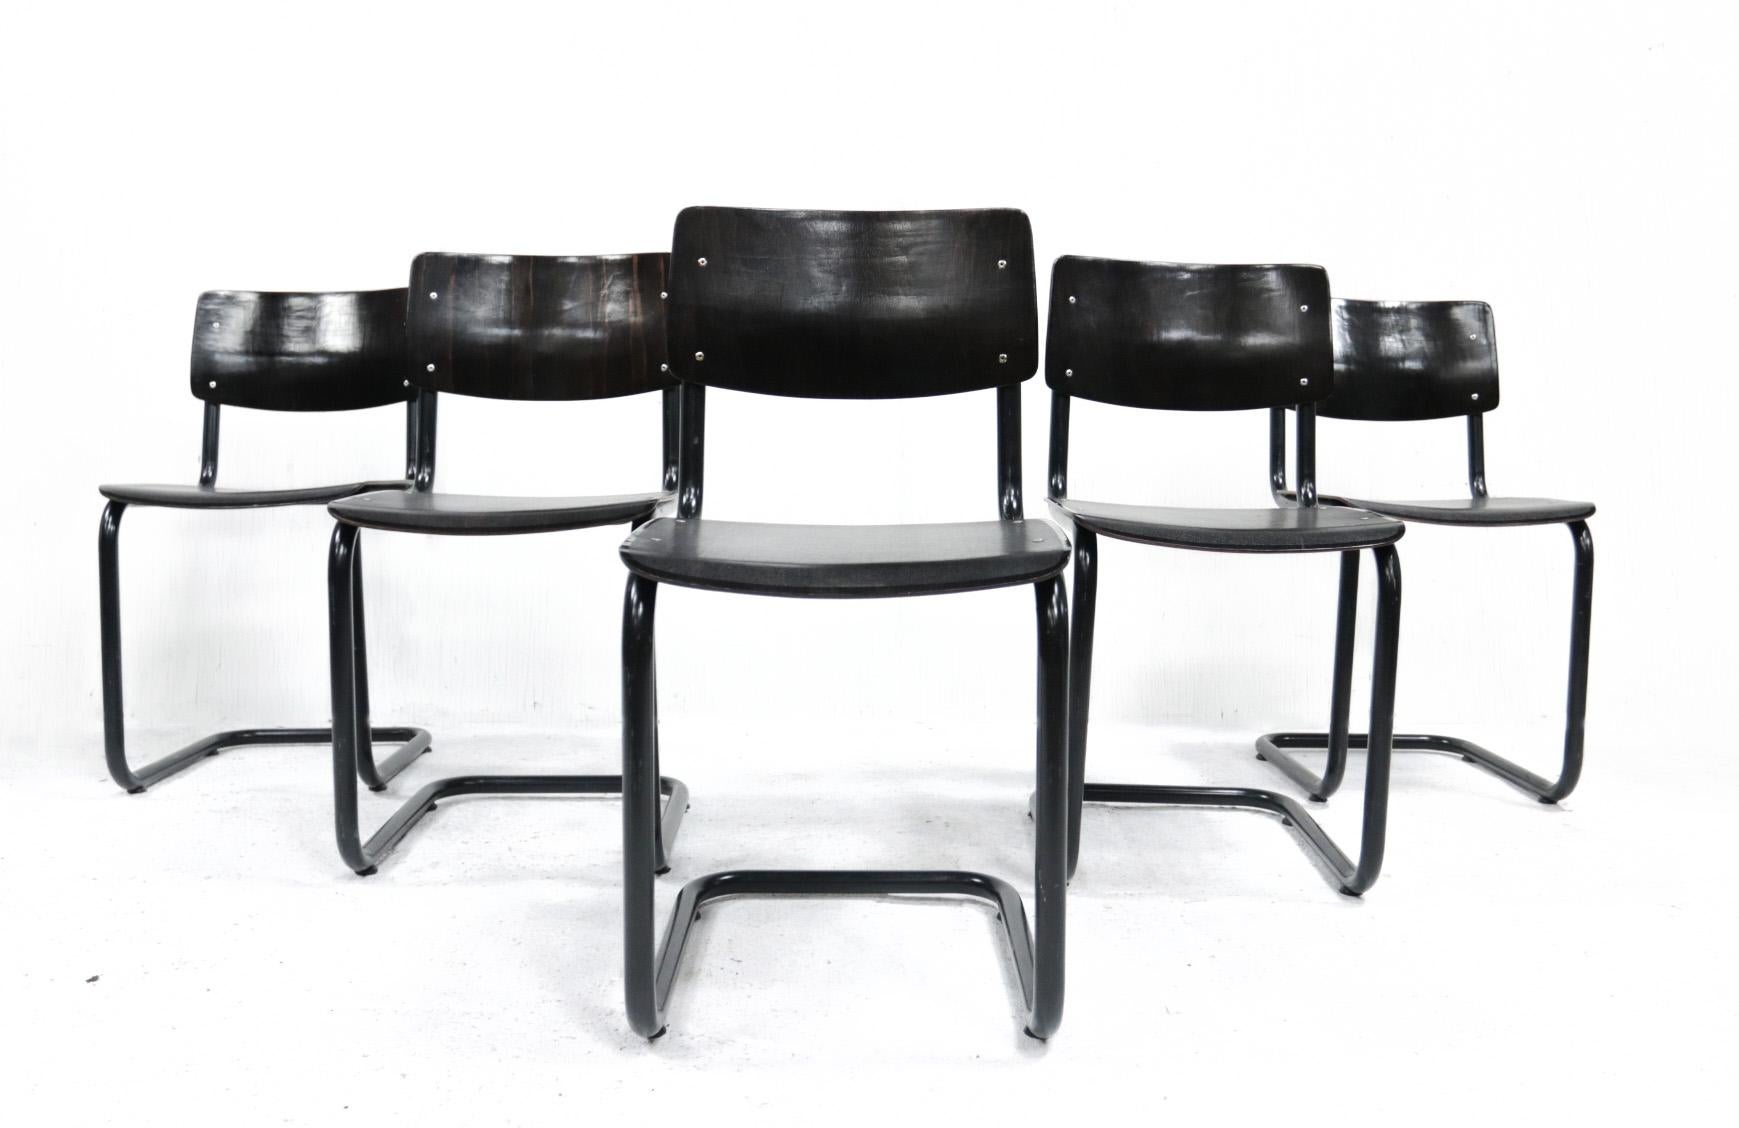 Dutch Design midcentury Marcel Breuer style dining chairs 1970 made by Ahrend.
The seat and back are made of deep dark brown (almost black) Pagholz and the metal frame has a black coating. The chairs have been very well preserved.

Dimensions: 42